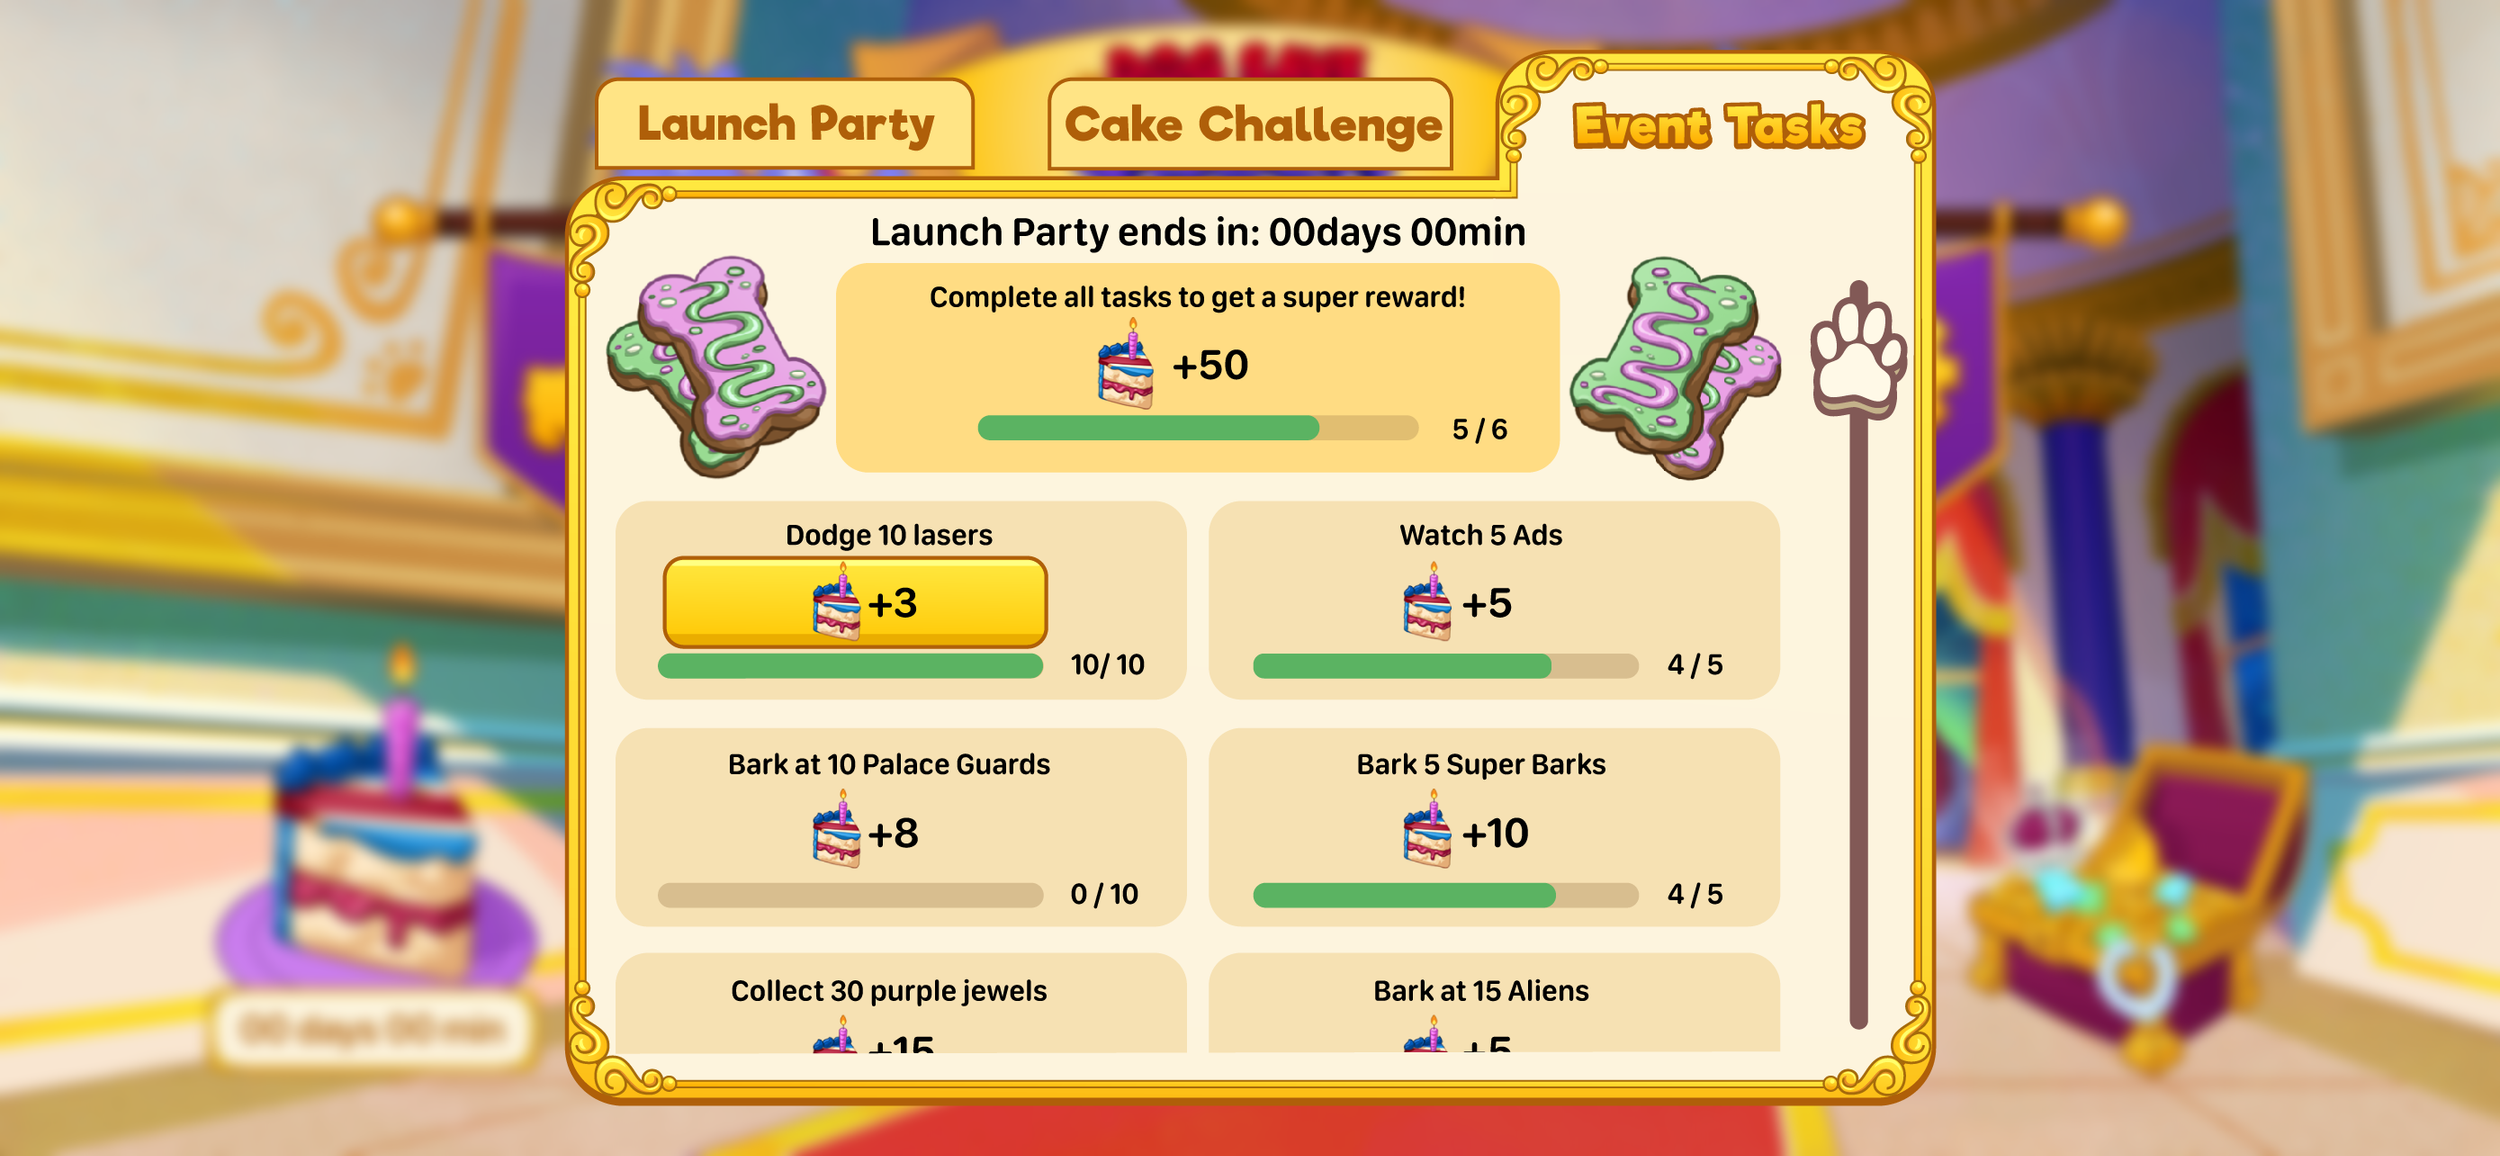 Event_LaunchParty_Tasks.png